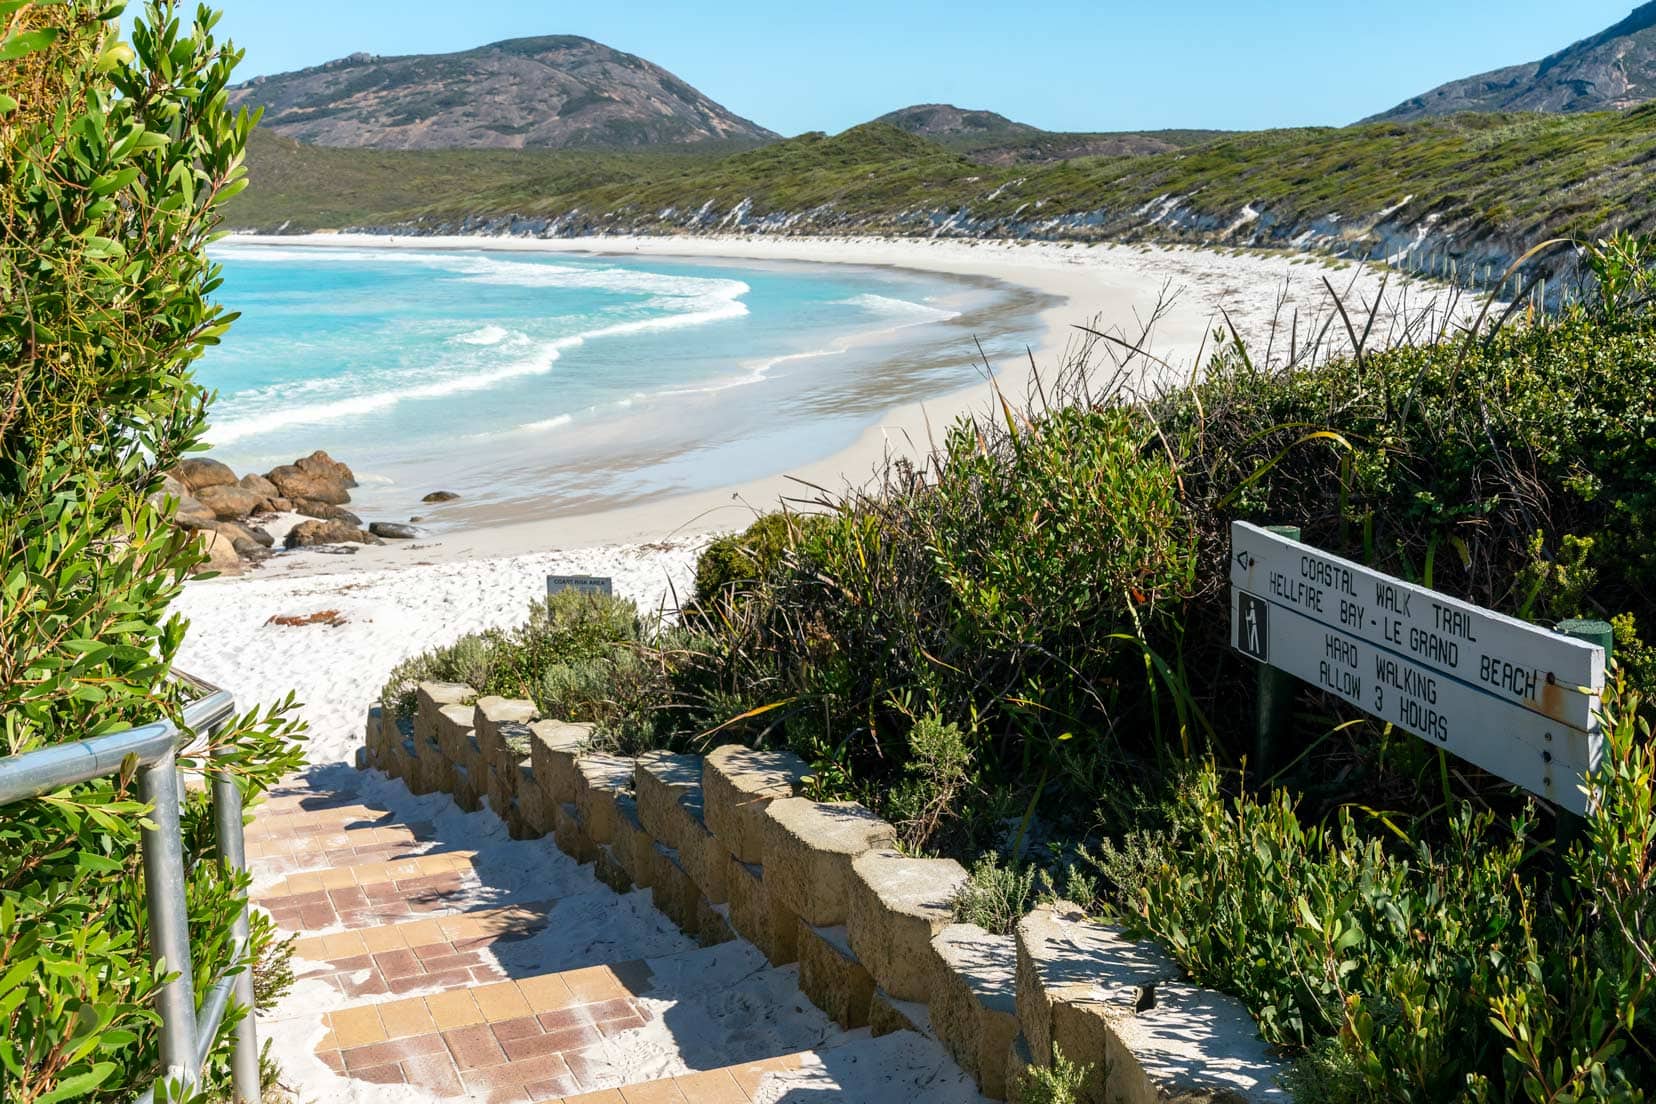 Stone steps leading down to white sand beach and turquoise ocean